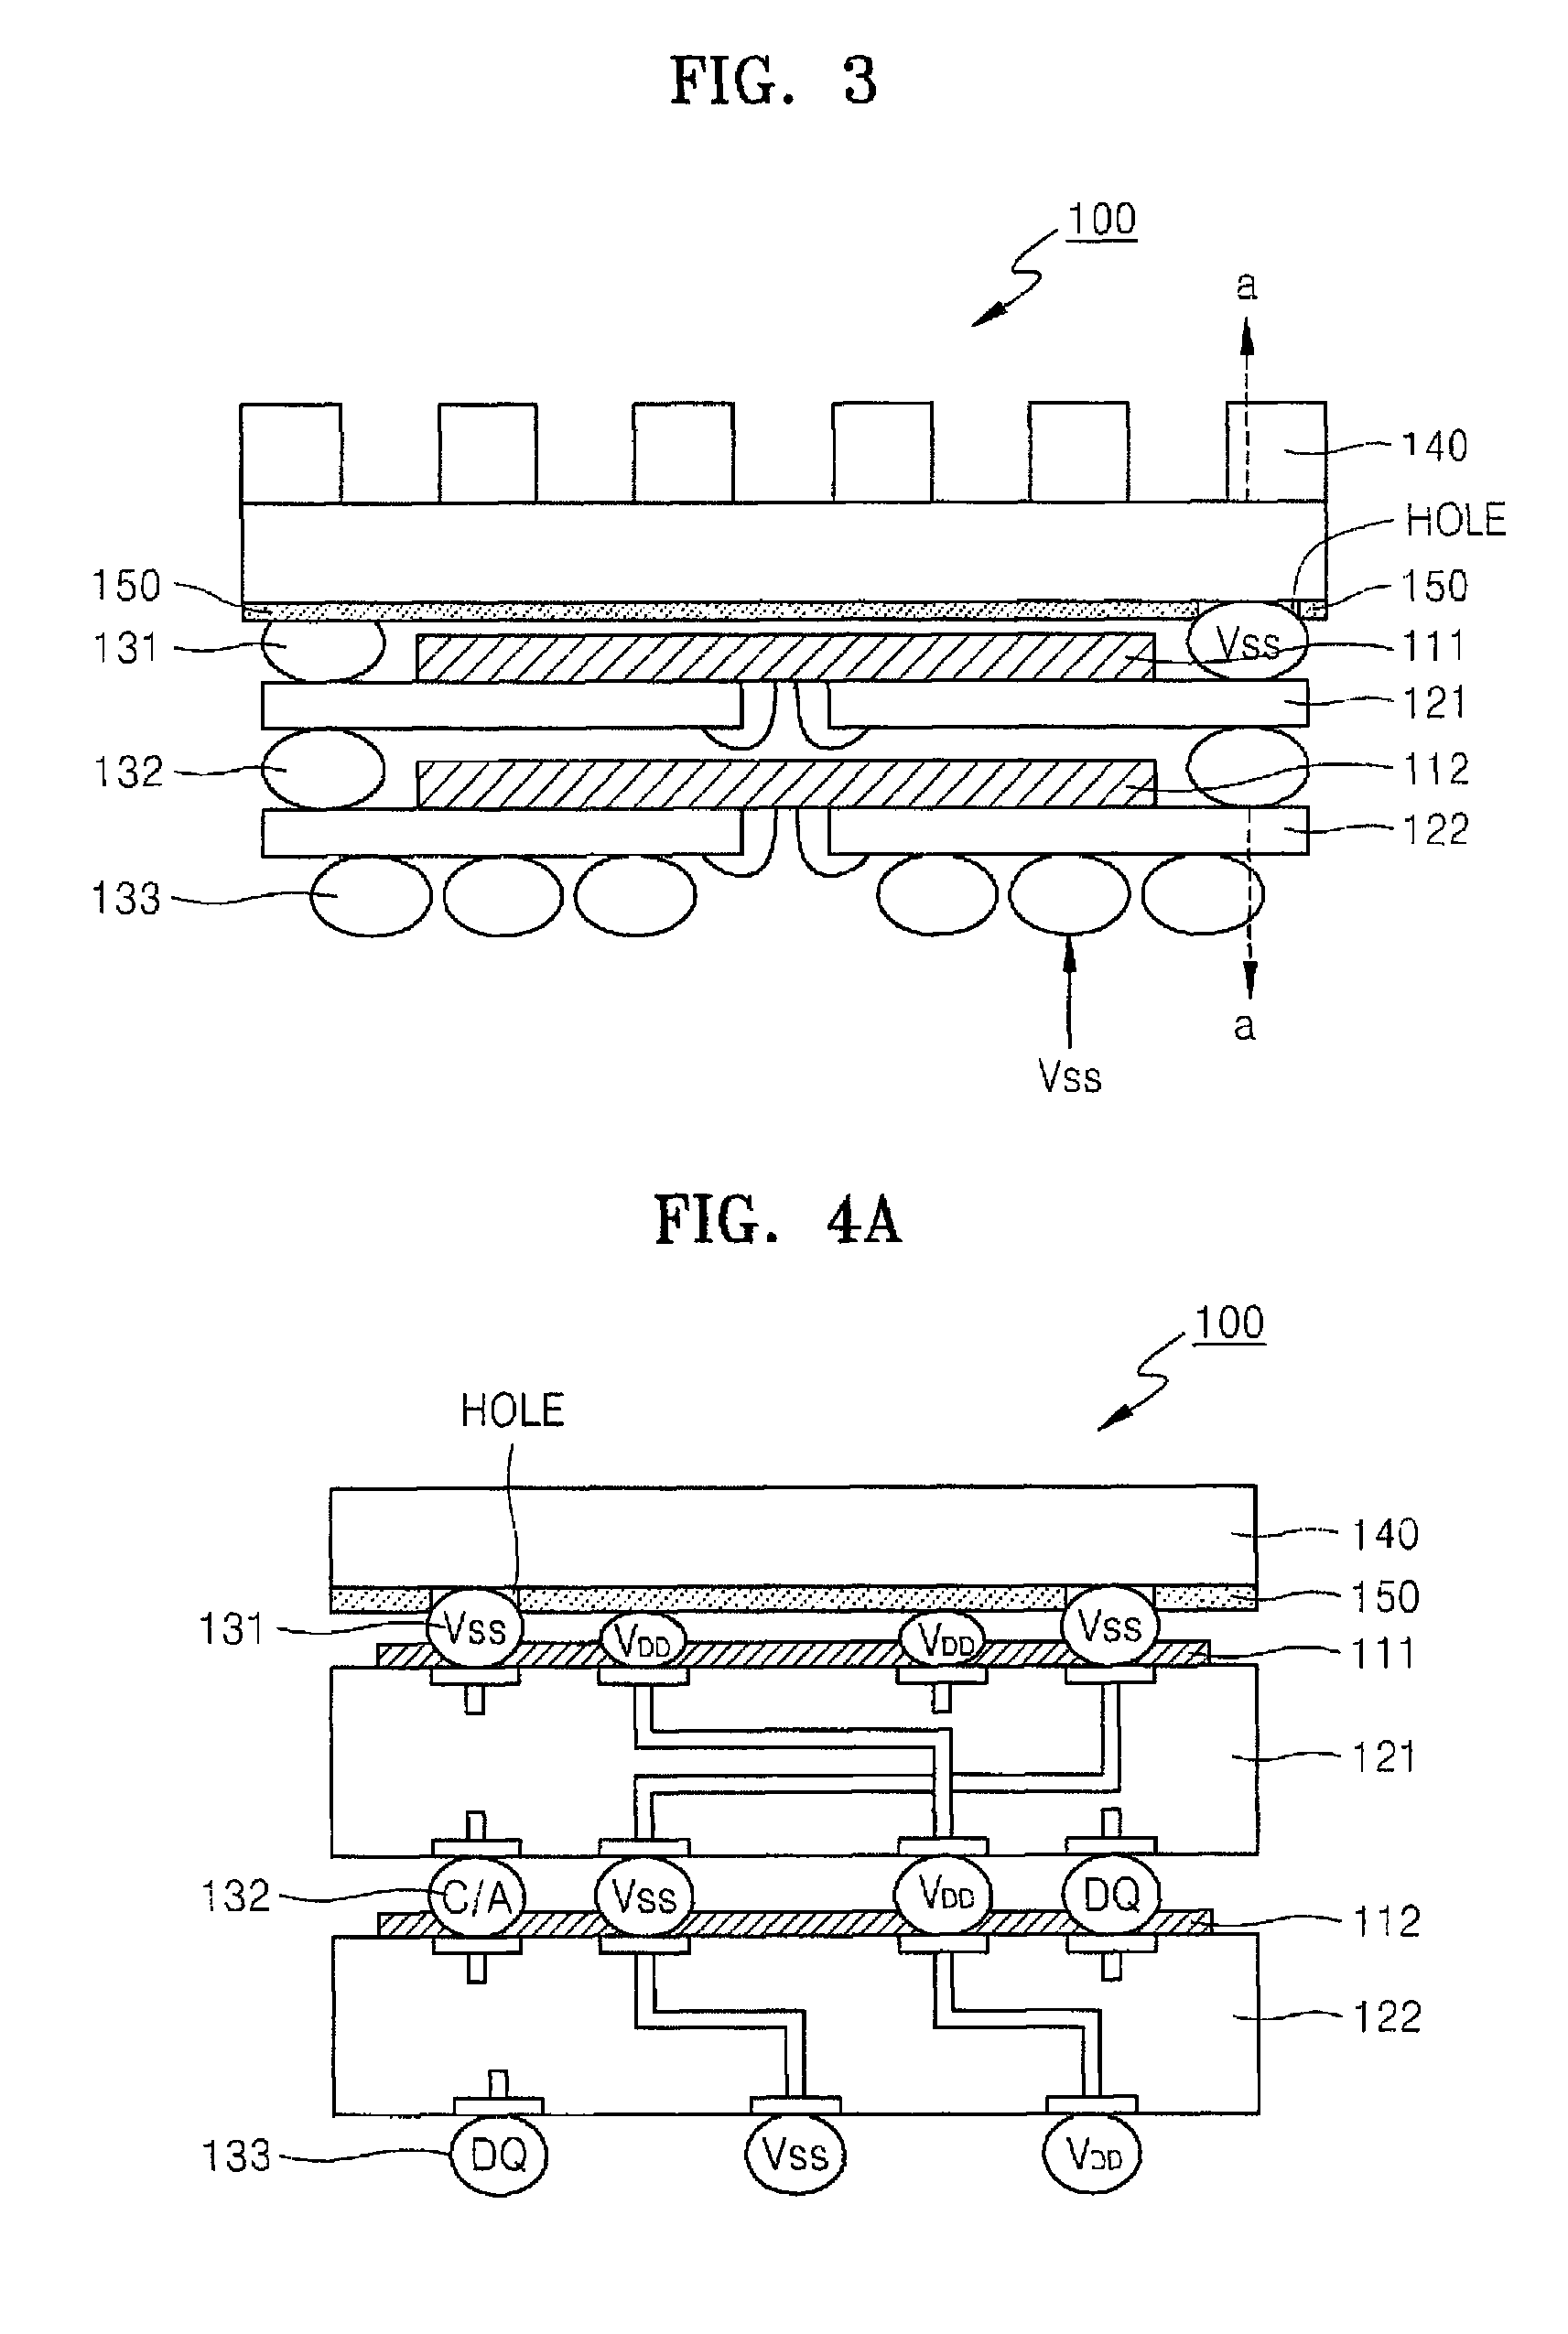 Semiconductor package having improved heat spreading performance